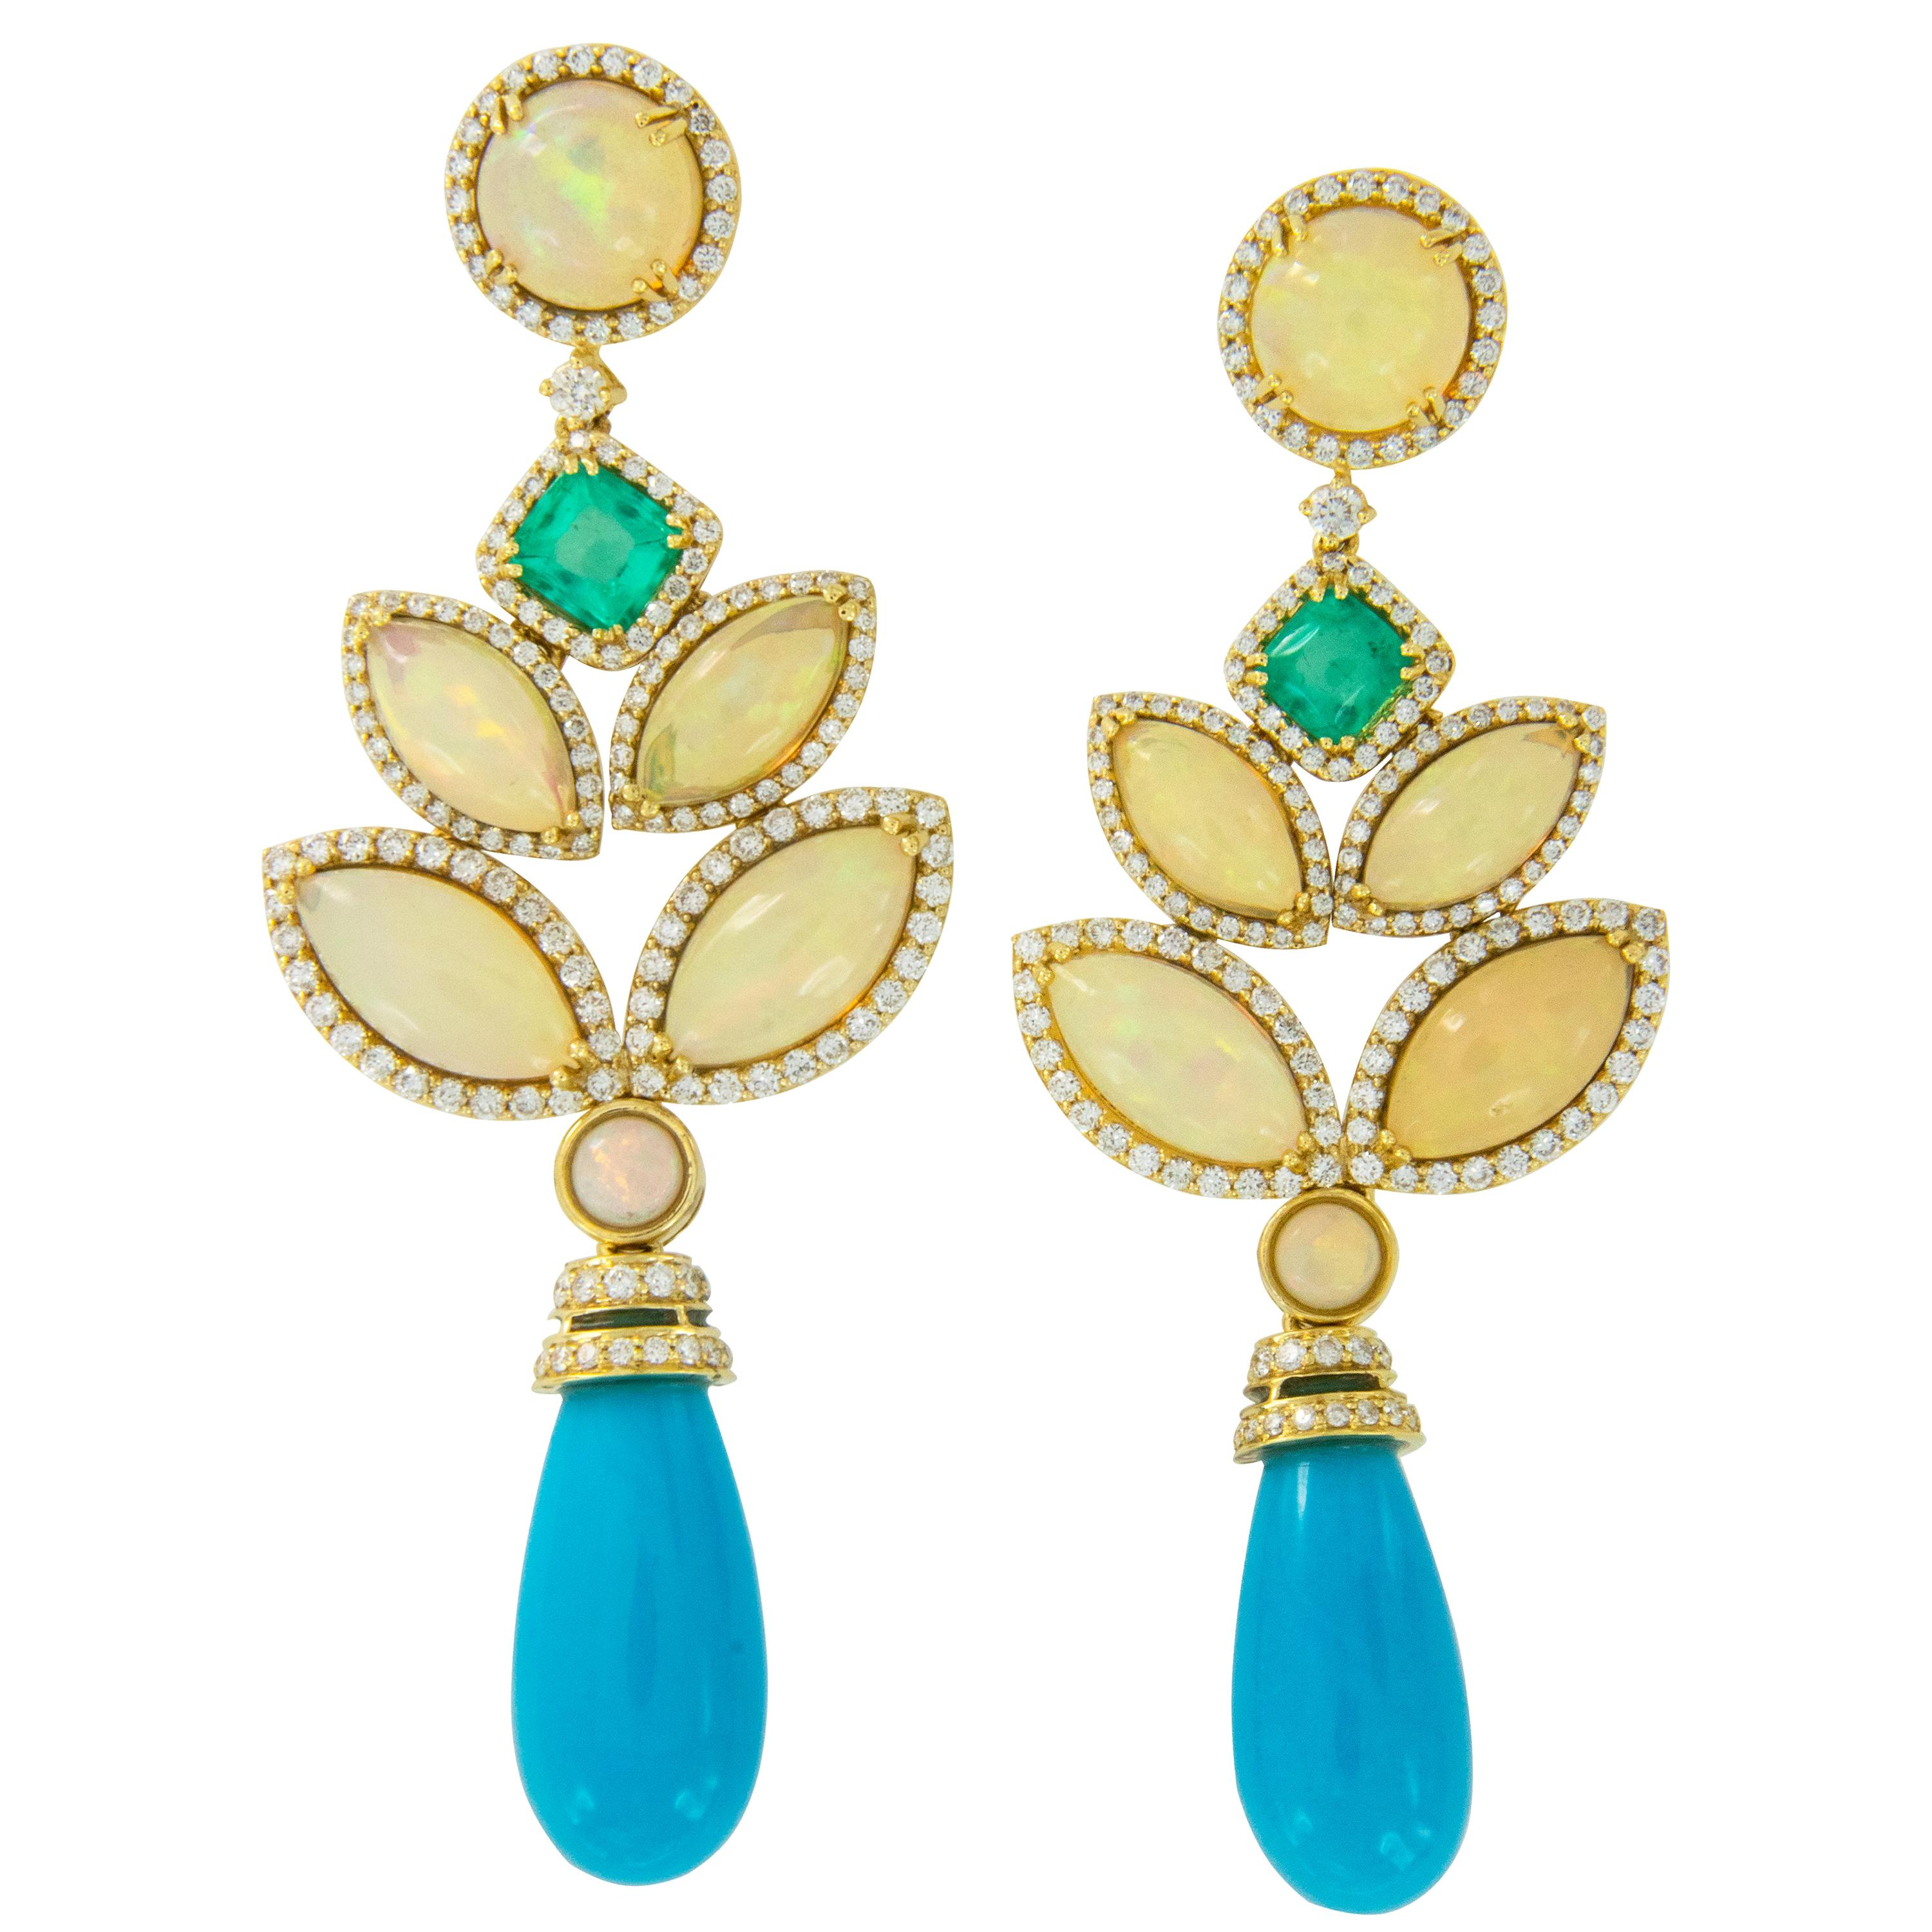 Goshwara Opal, Emerald And Turquoise Drop With Diamond Earrings For ...